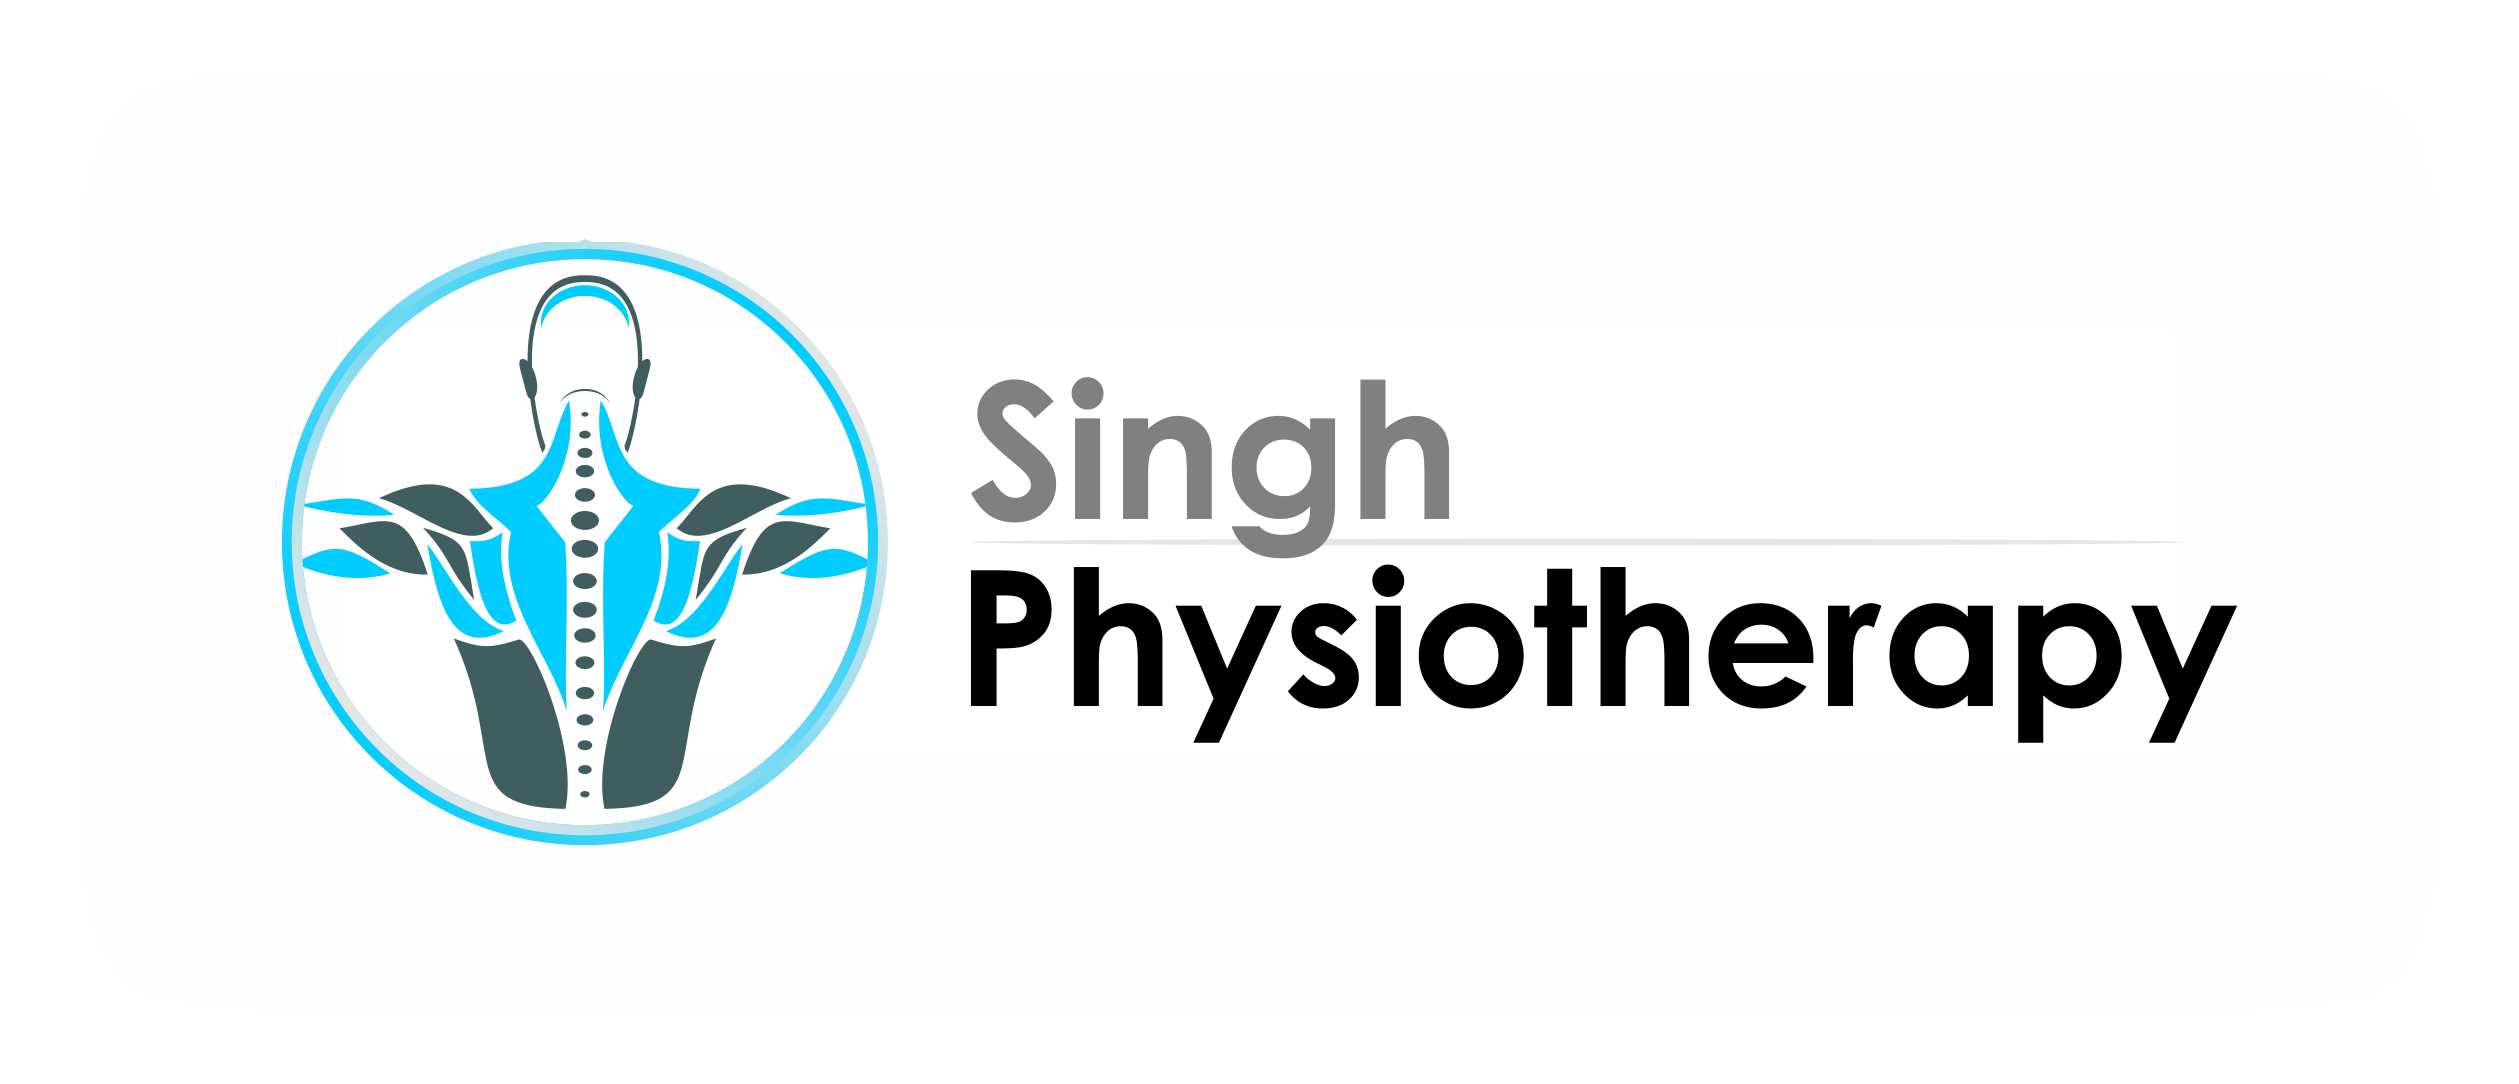 Singh Physiotherapy|Hospitals|Medical Services